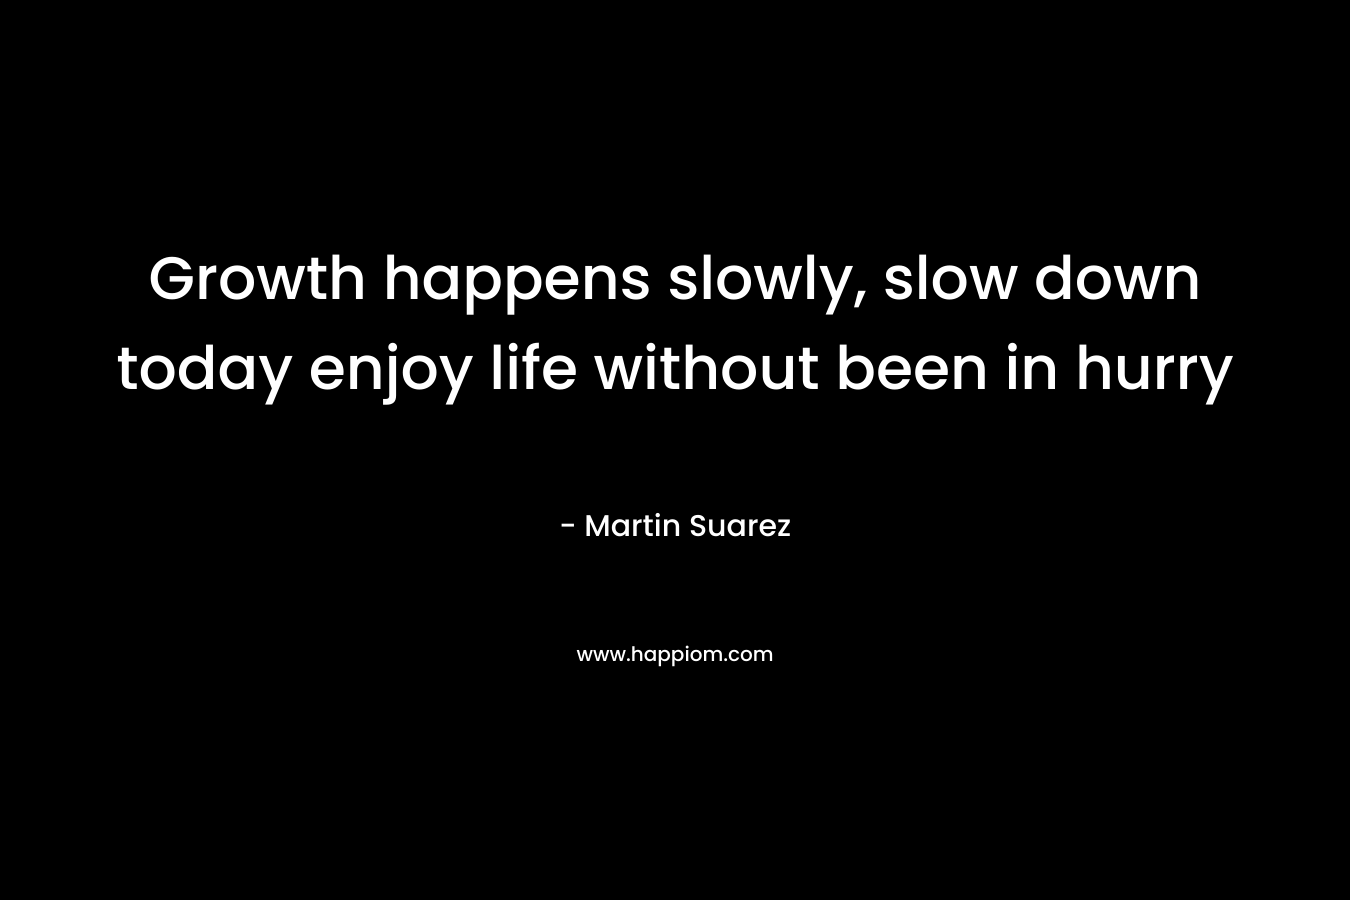 Growth happens slowly, slow down today enjoy life without been in hurry – Martin Suarez